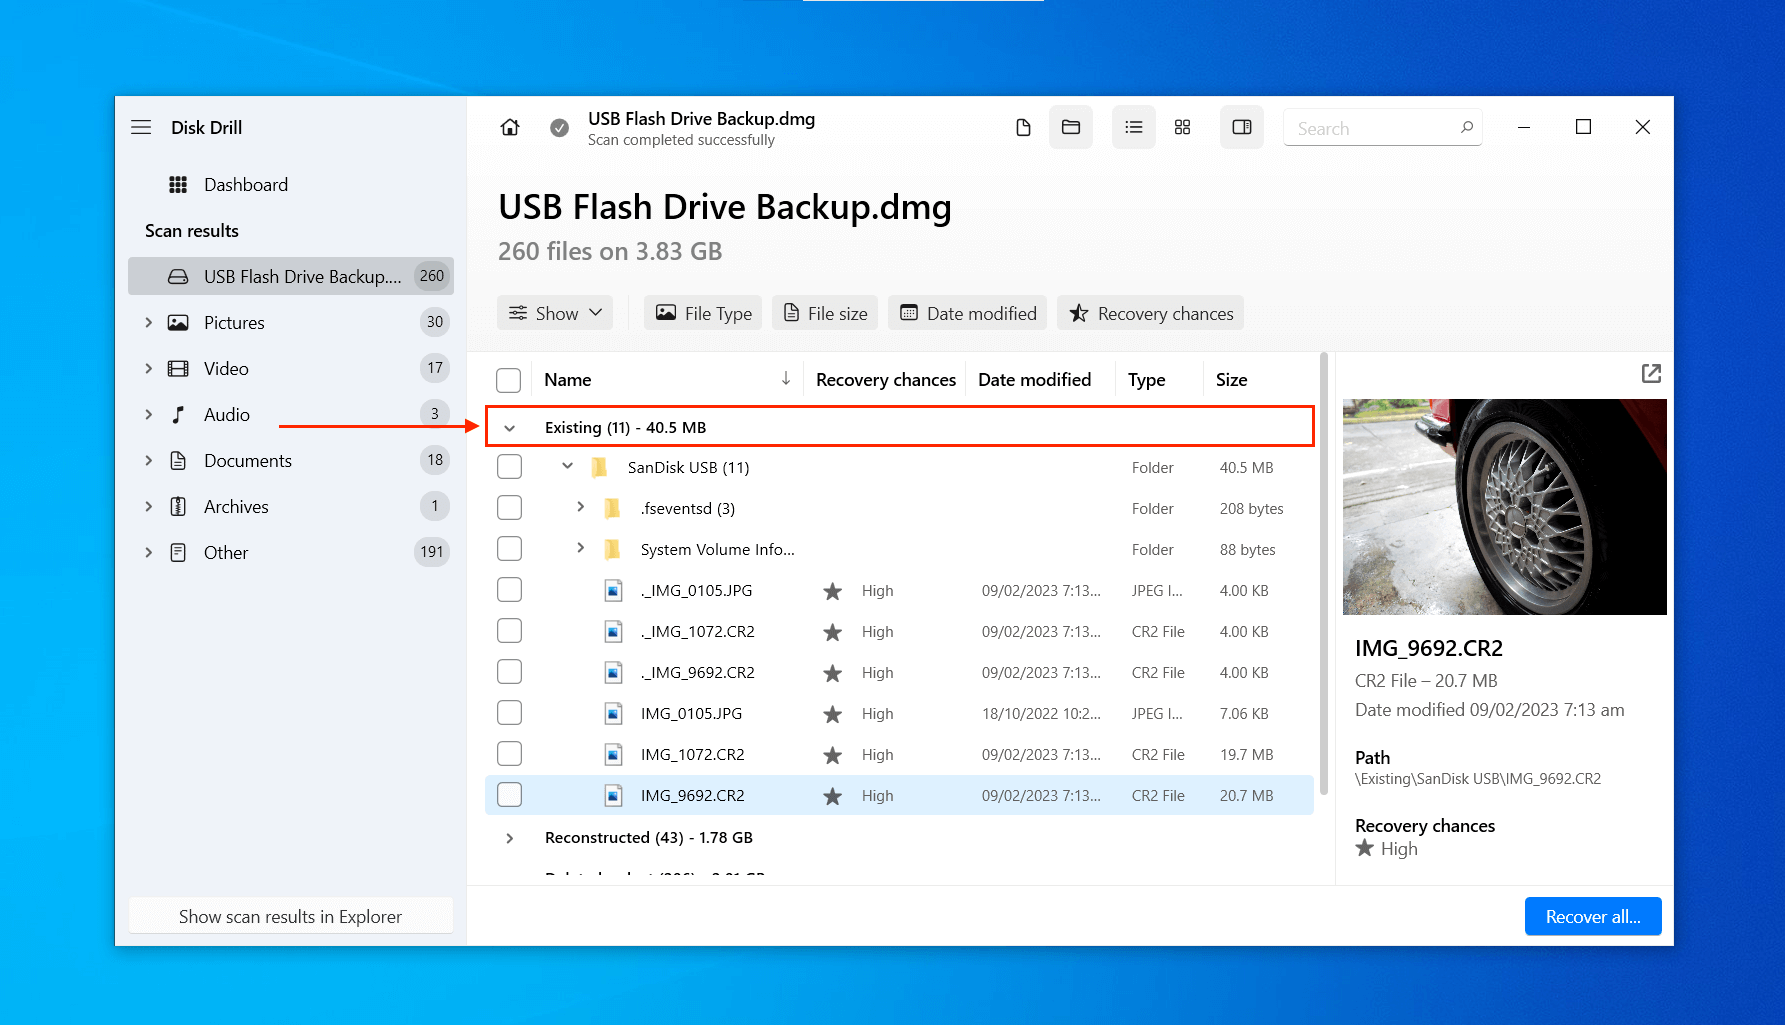 Disk Drill existing image backup files